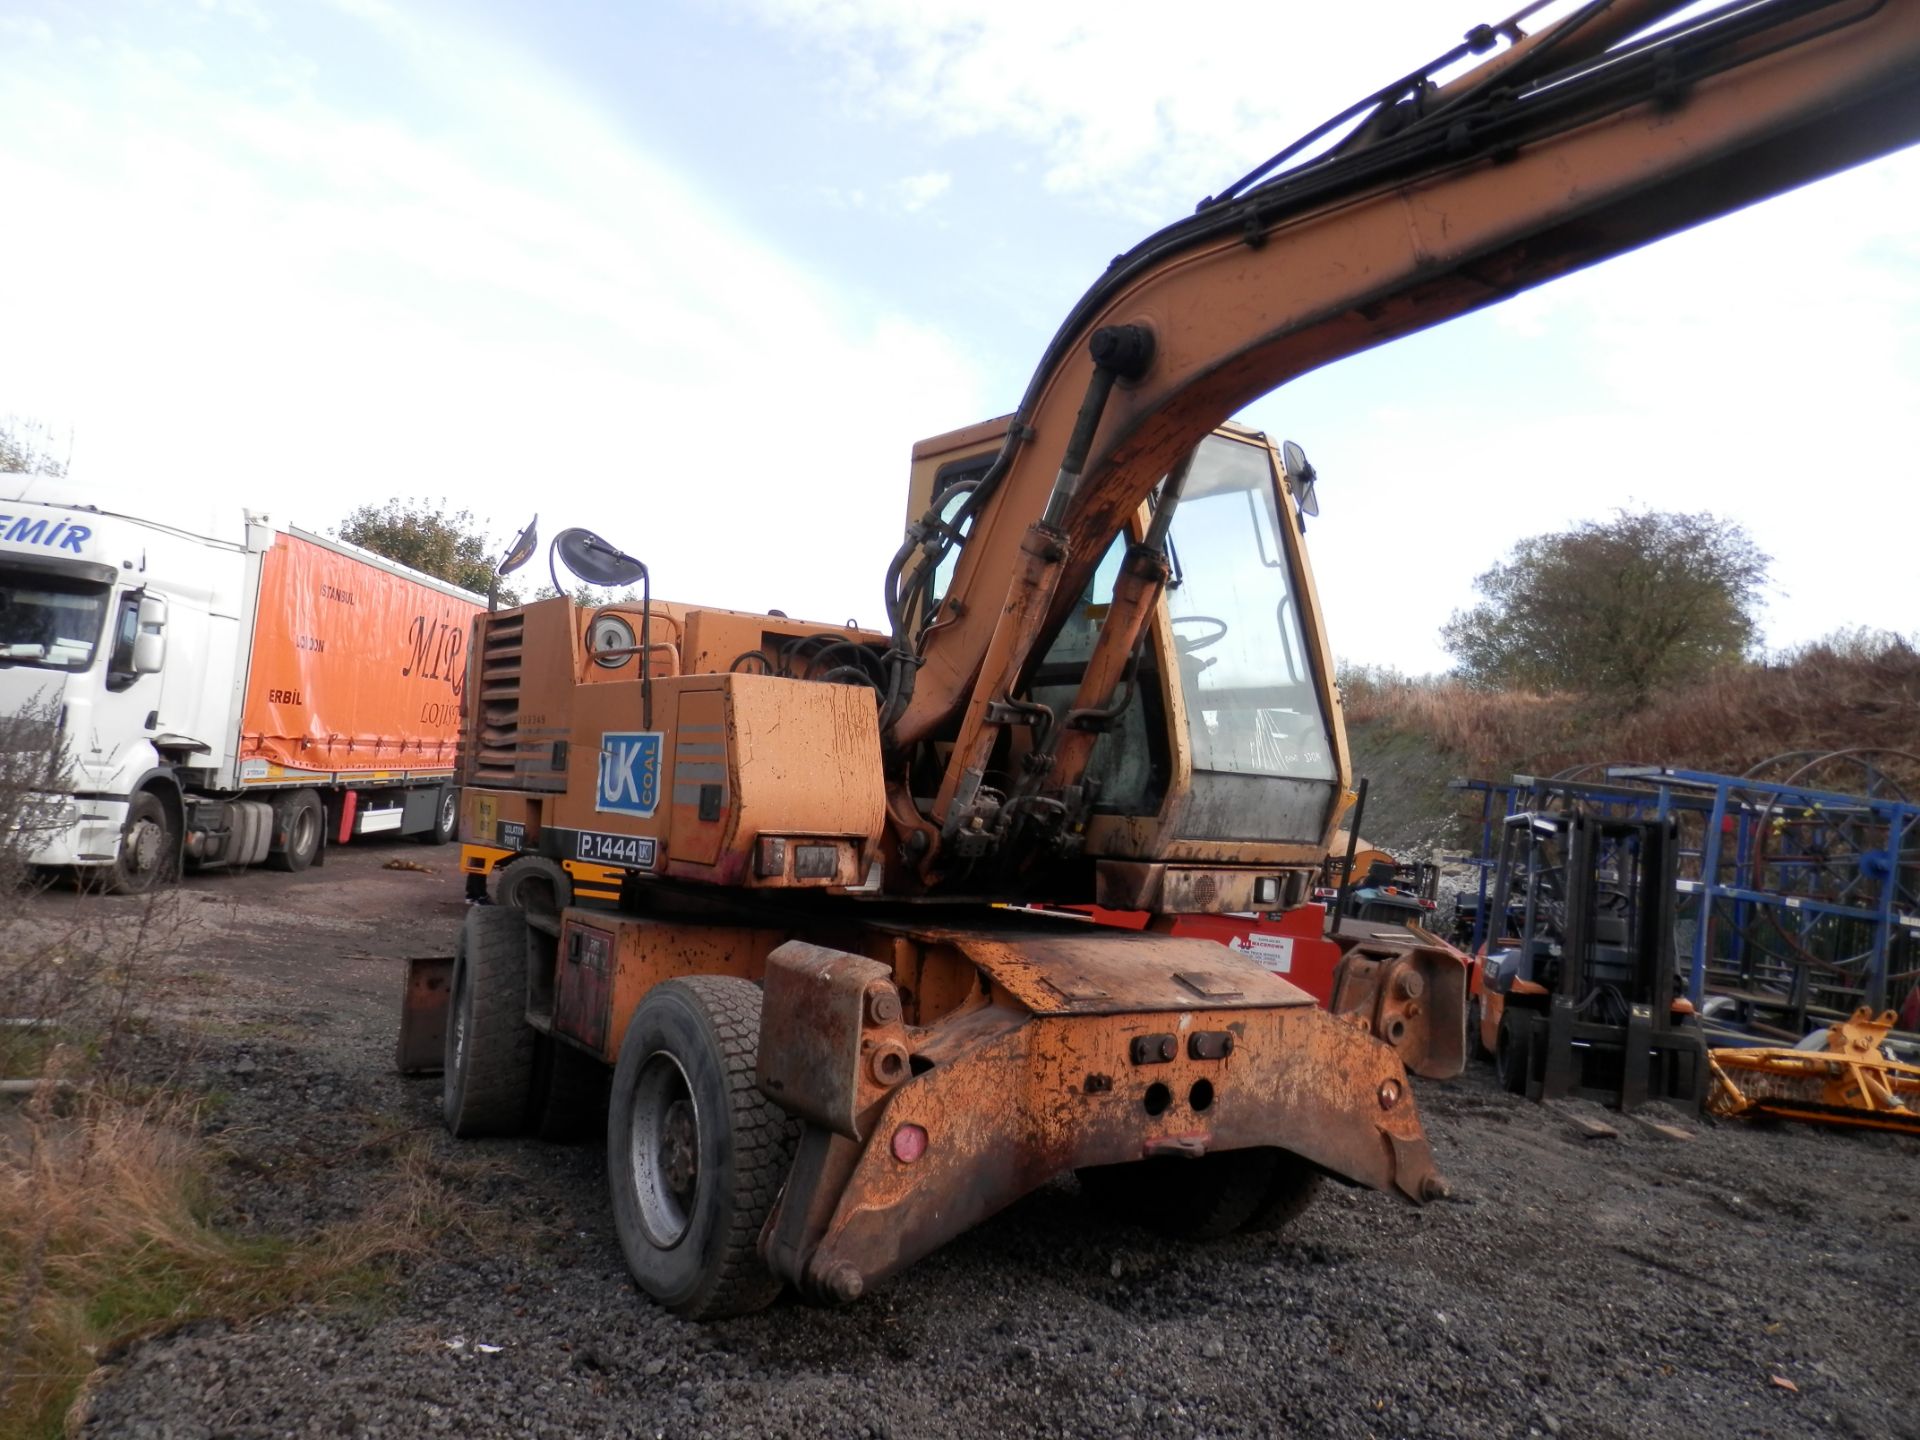 ALL WORKING CASE 688BP 17.2 TONNE DIGGER, 65KW DIESEL ENGINE & MAGNETIC LIFT ATTACHMENT INCLUDED. - Image 5 of 17